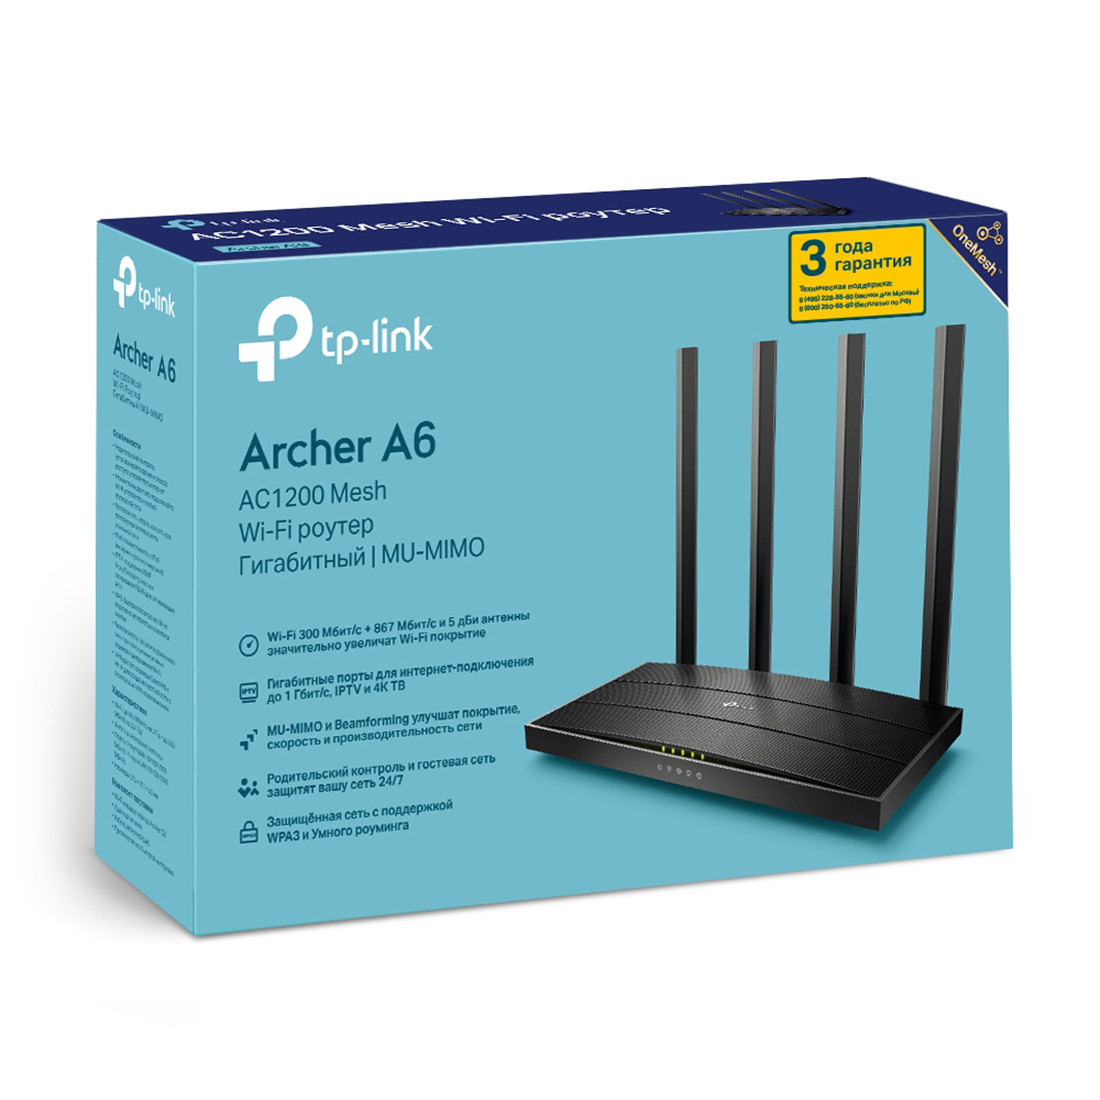 Маршрутизатор TP-Link Archer A6 - фото 3 - id-p111757980